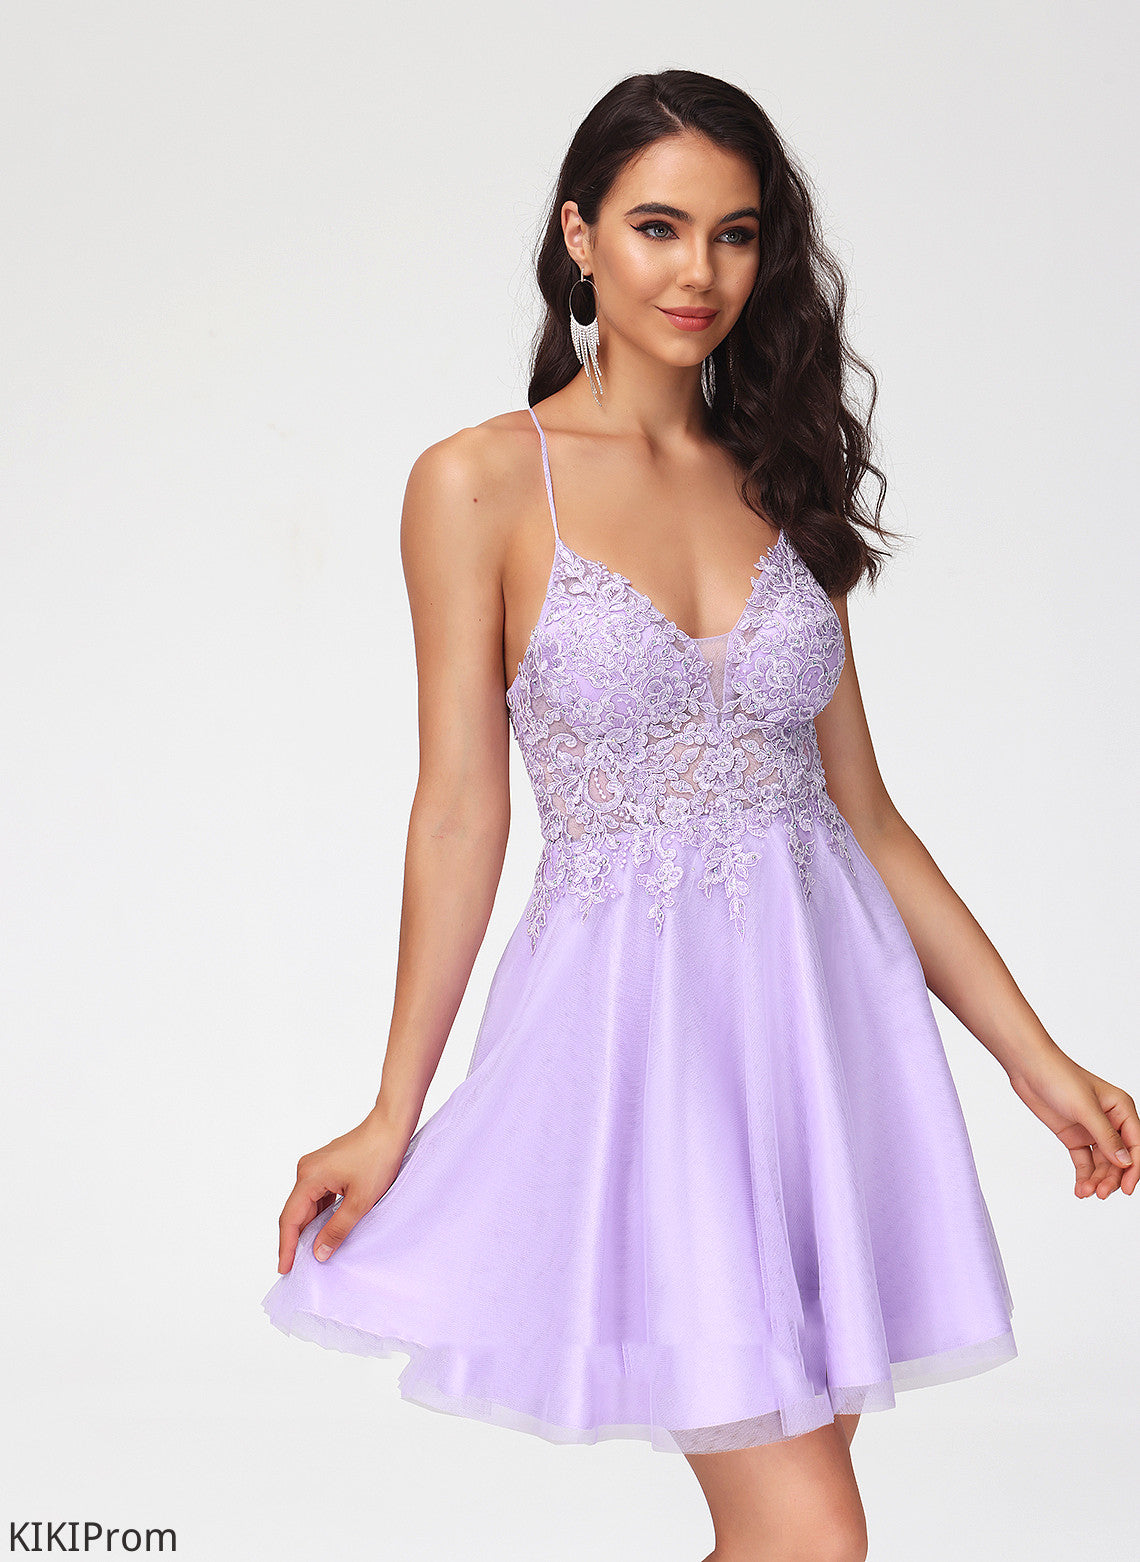 Nellie Tulle Dress Beading Homecoming V-neck Homecoming Dresses Short/Mini Lace With A-Line